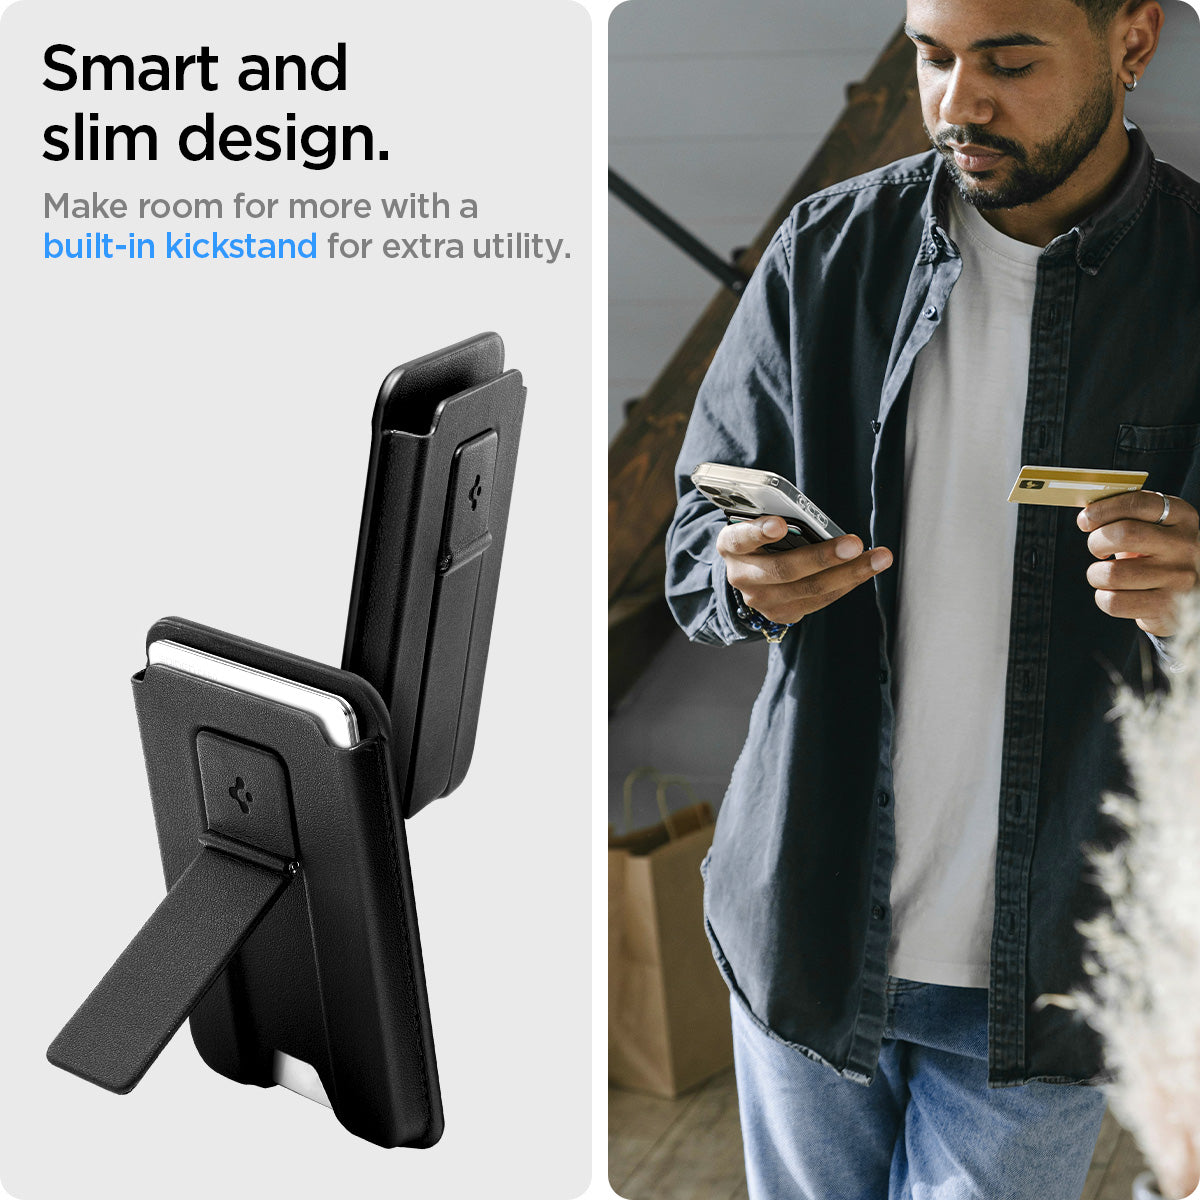 AFA07149 - MagSafe Card Holder Smart Fold 2 (MagFit) in Black showing the smart and slim design, make room for more with a built-in kickstand for extra utility